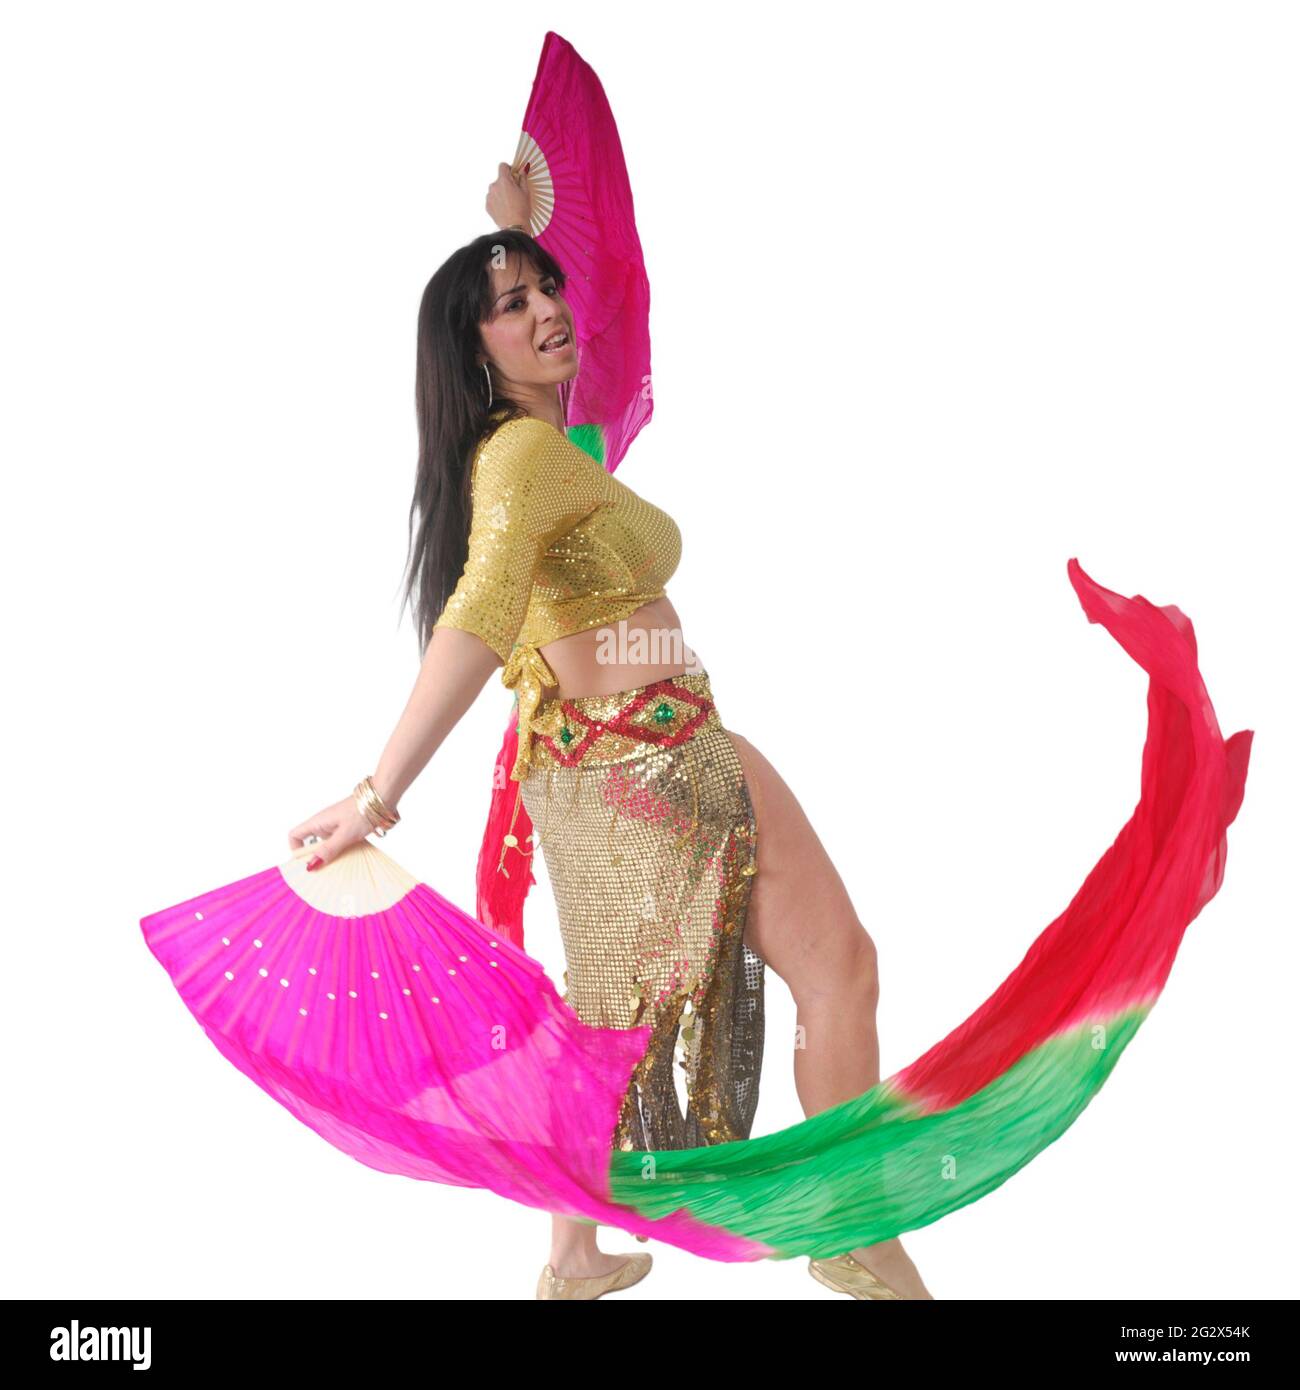 Egyptian style Belly dancer On white Background Stock Photo